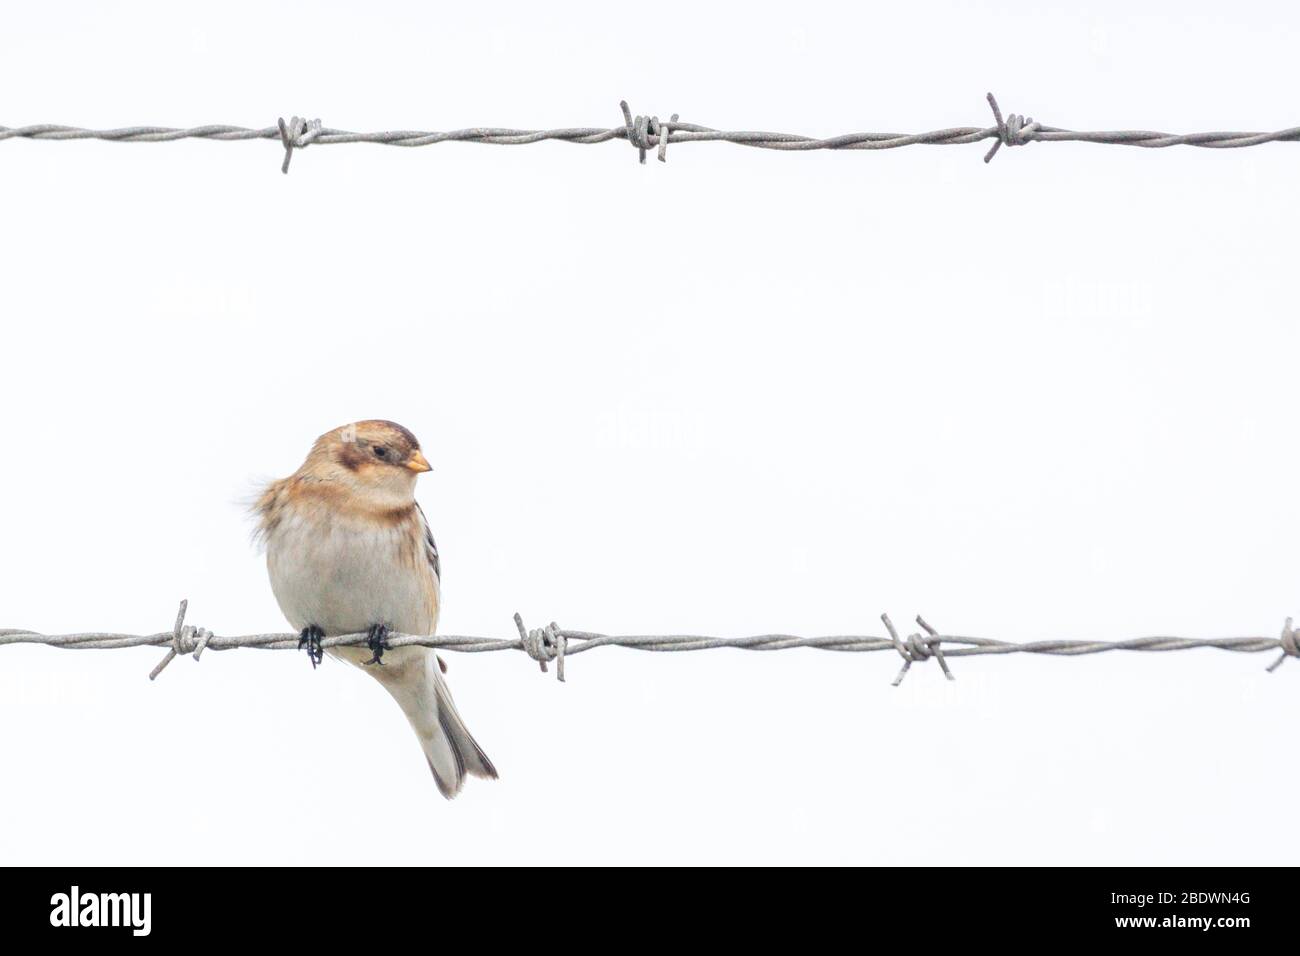 Snow Bunting, Plectrophenax nivalis, in winter plumage on barbed wire, Norfolk, UK Stock Photo